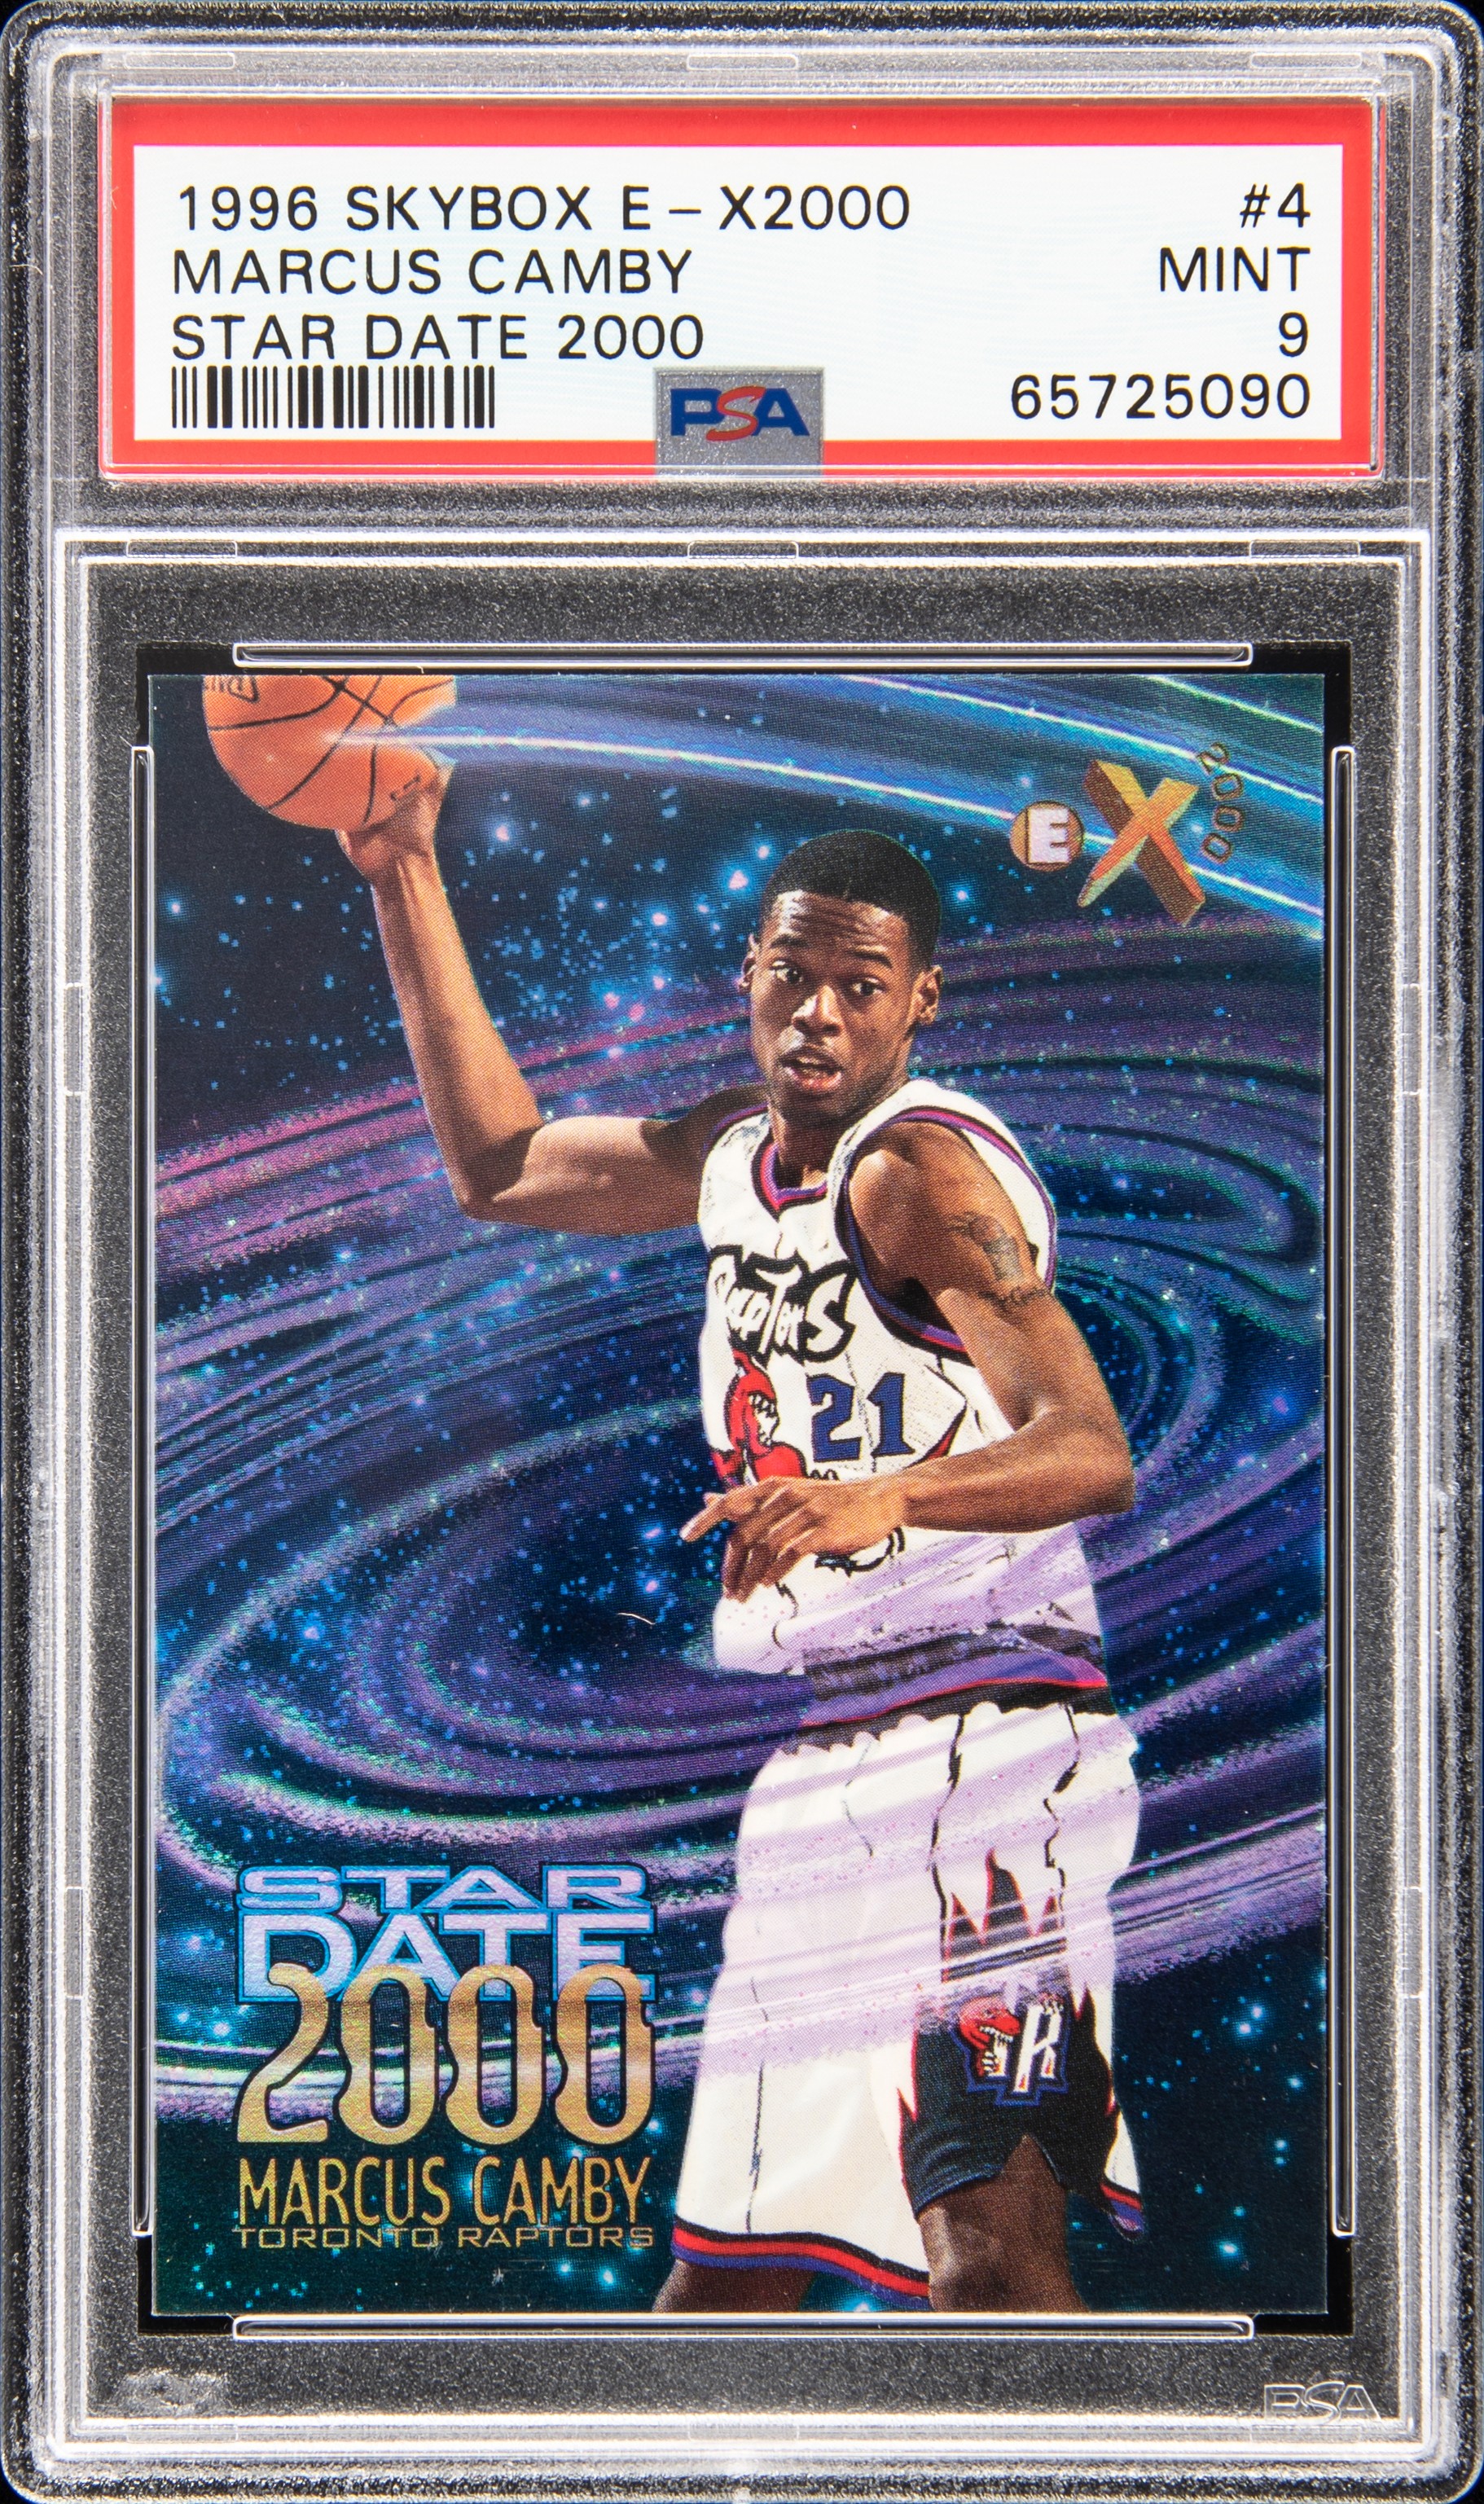 1996 Skybox E-X2000 Star Date 2000 4 Marcus Camby – PSA MINT 9